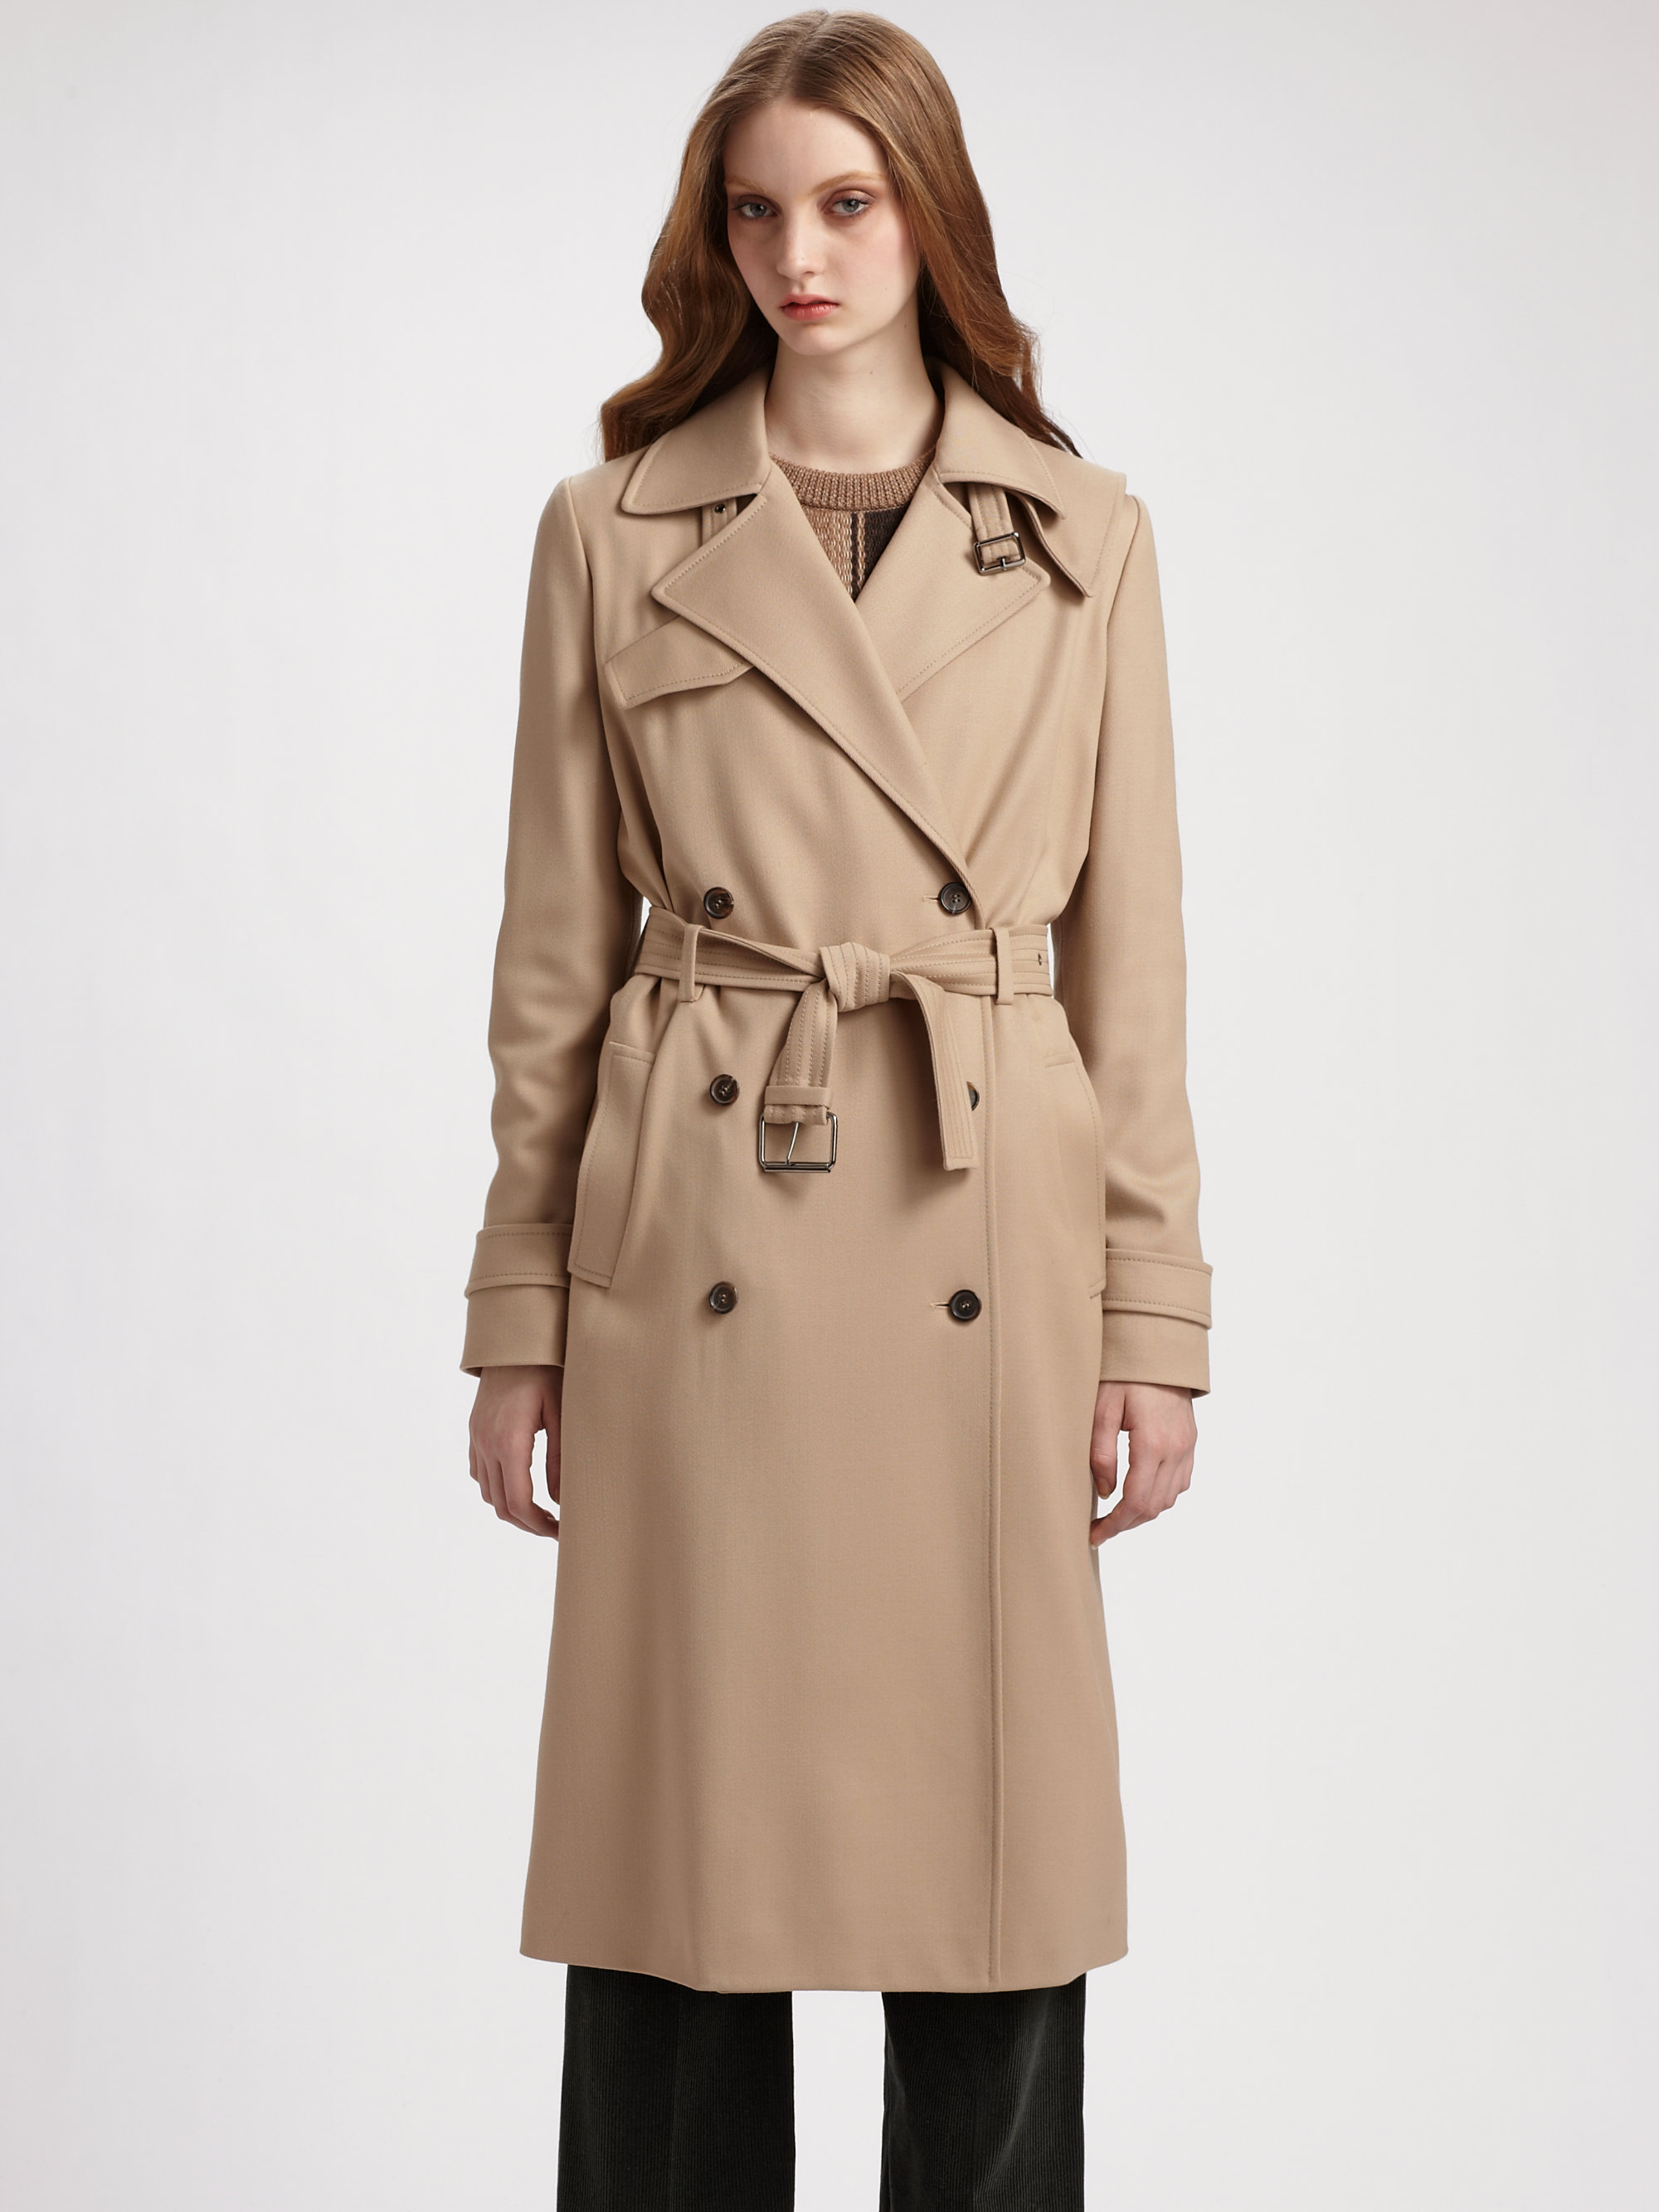 Chloé Wool Drill Trenchcoat in Beige | Lyst